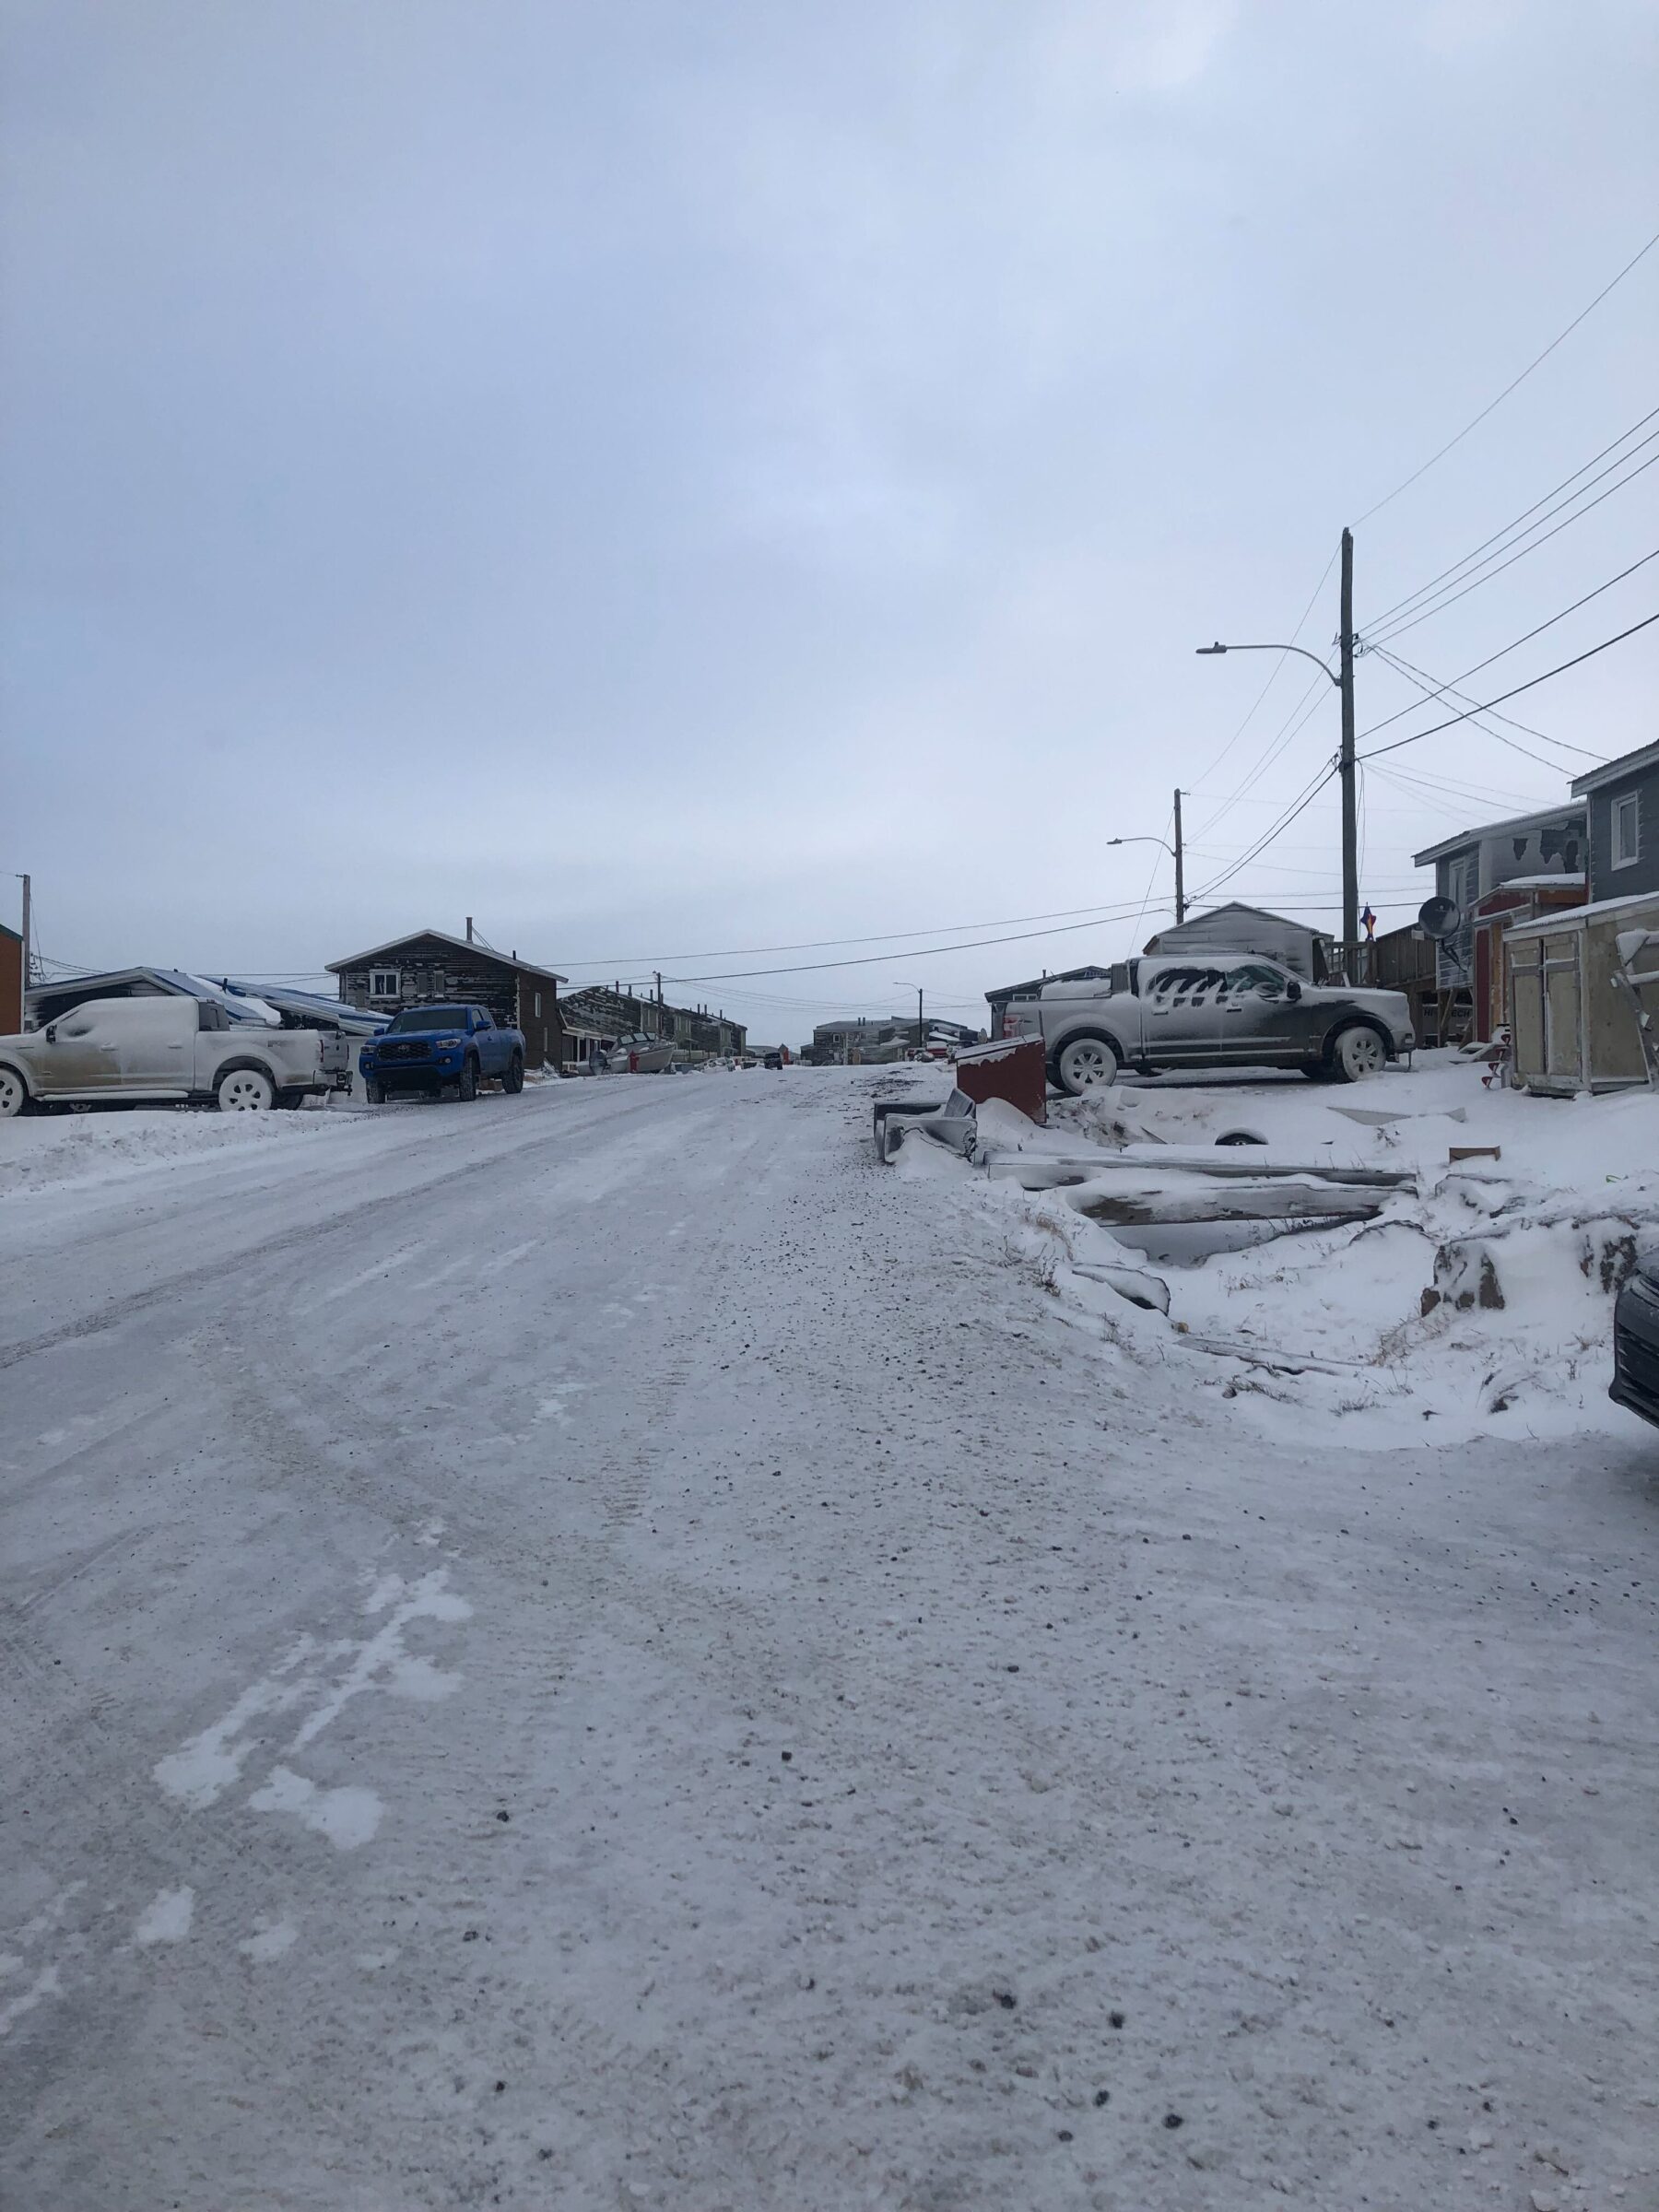 Halloween going ahead Wednesday in Iqaluit as city cleans up after ...